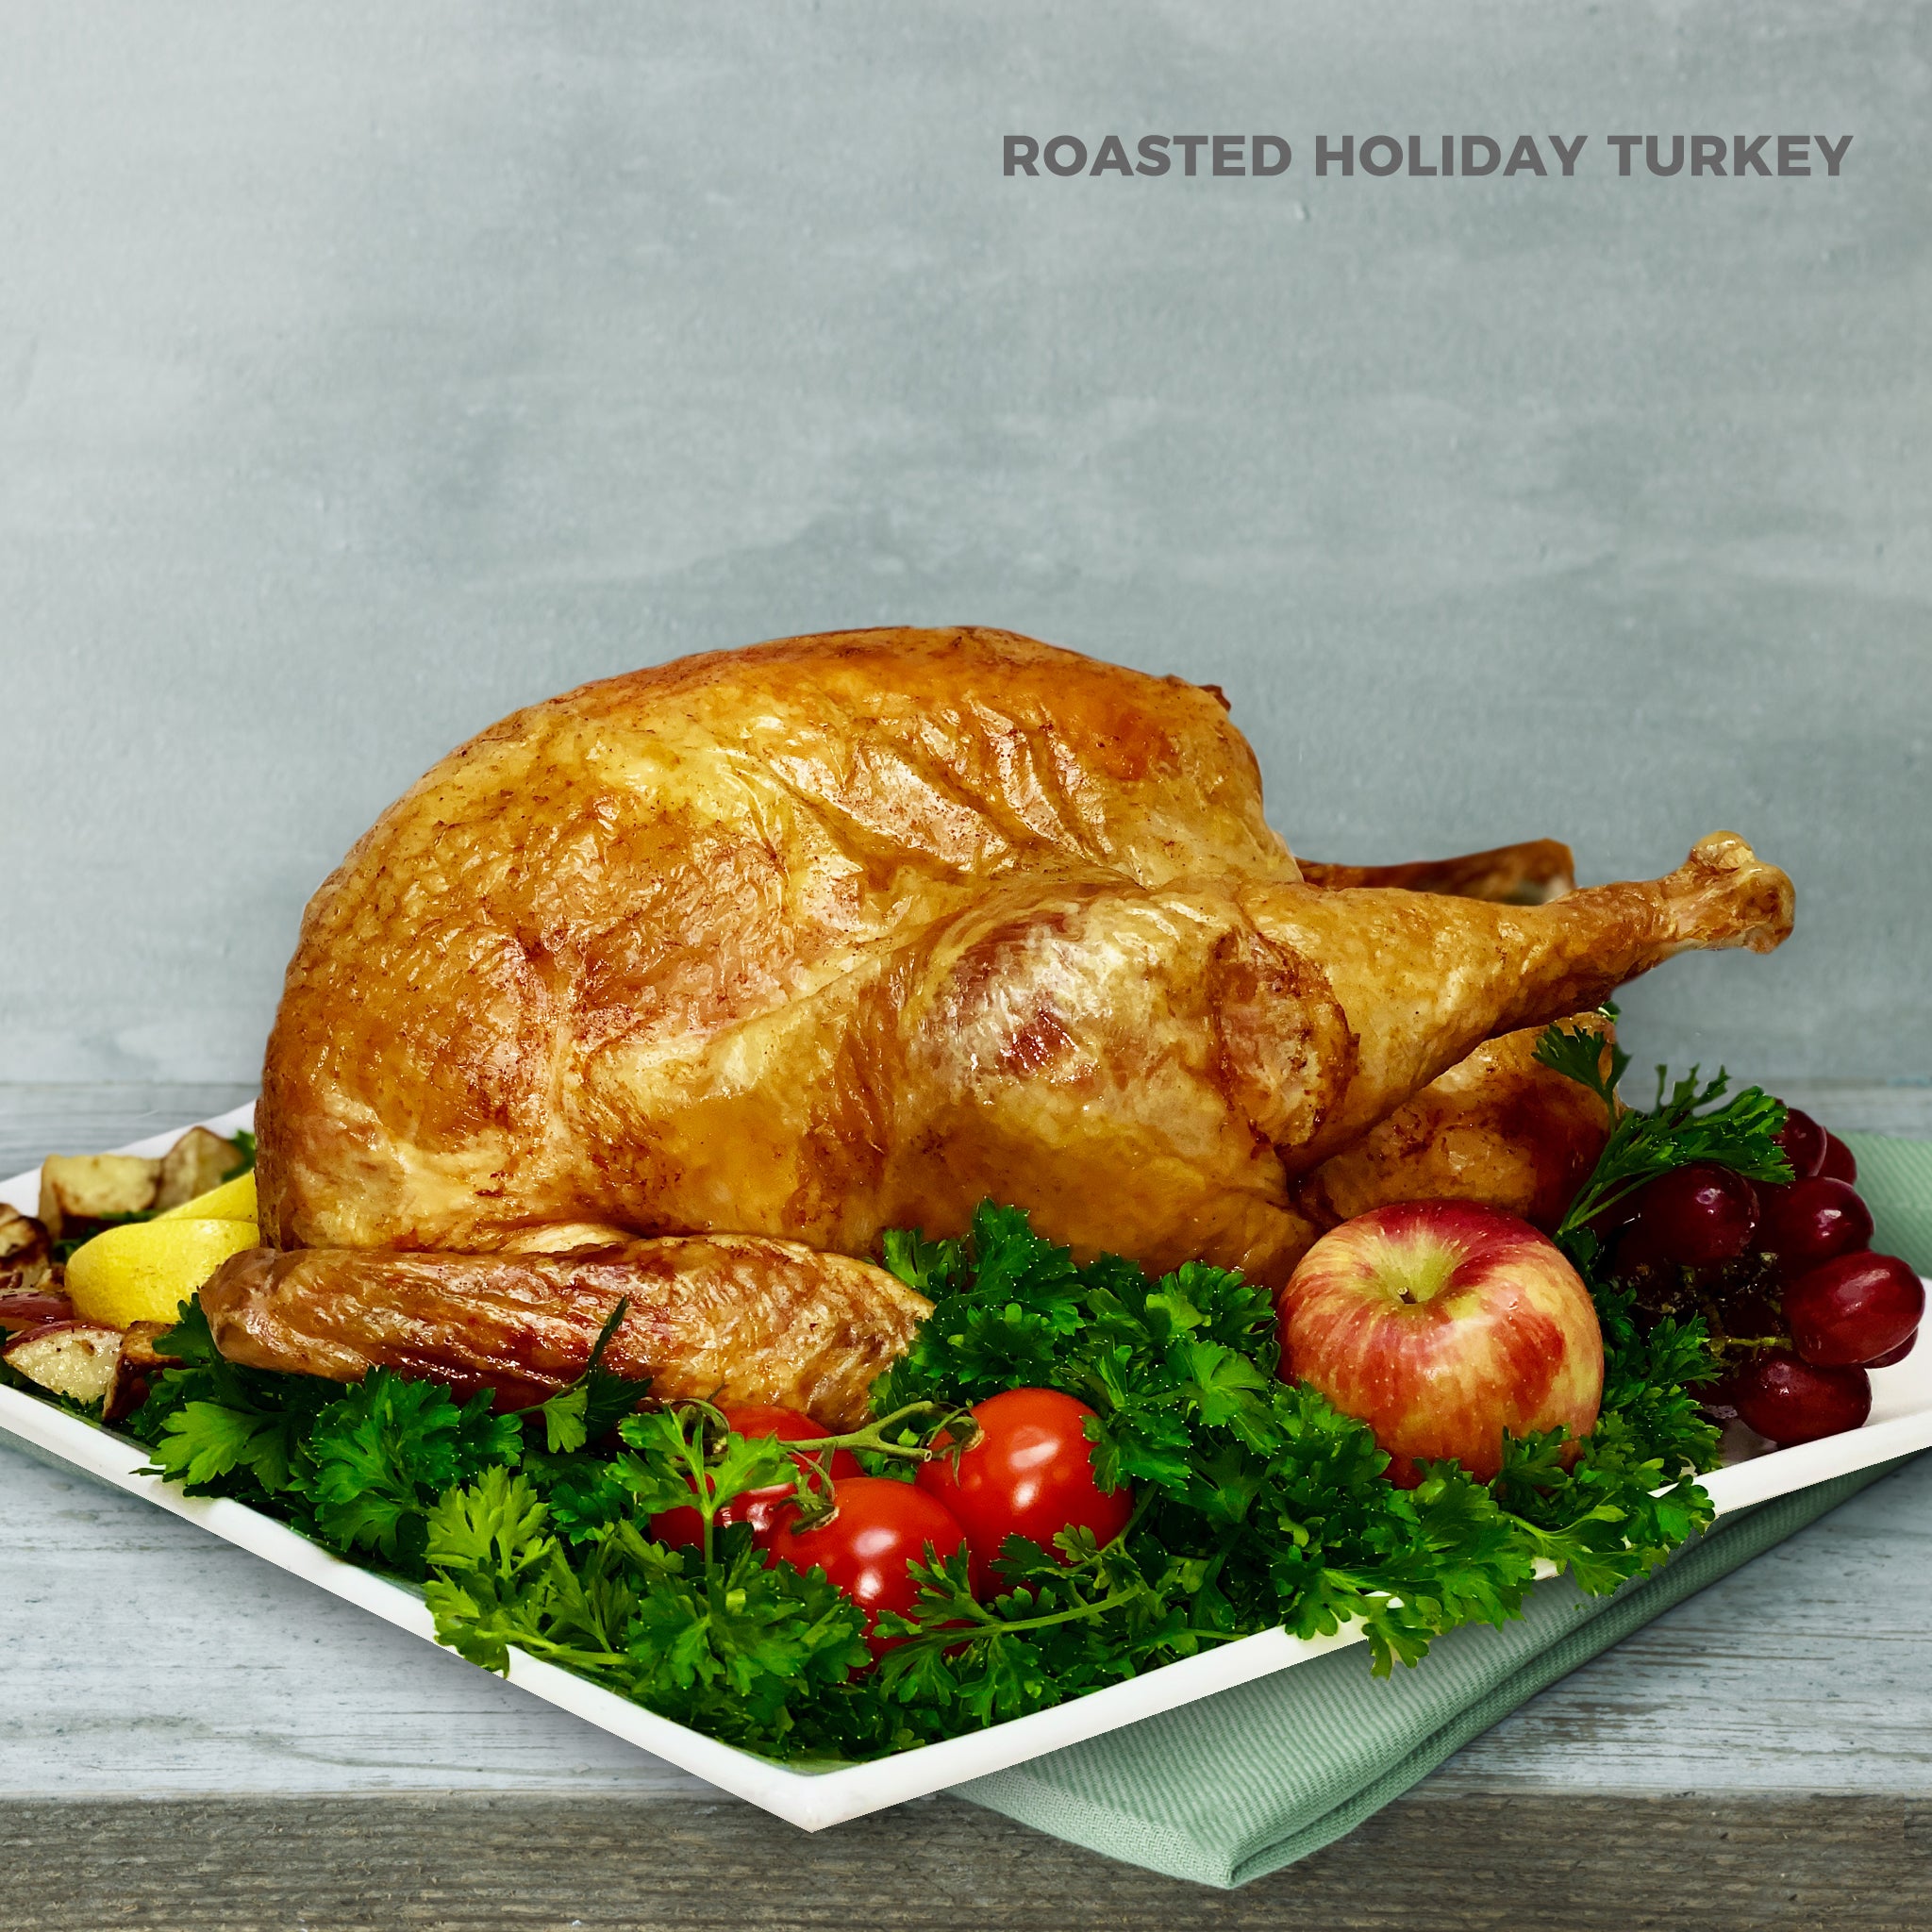 Premium Thanksgiving | Holiday Dinner Catering Package (Serves 10)